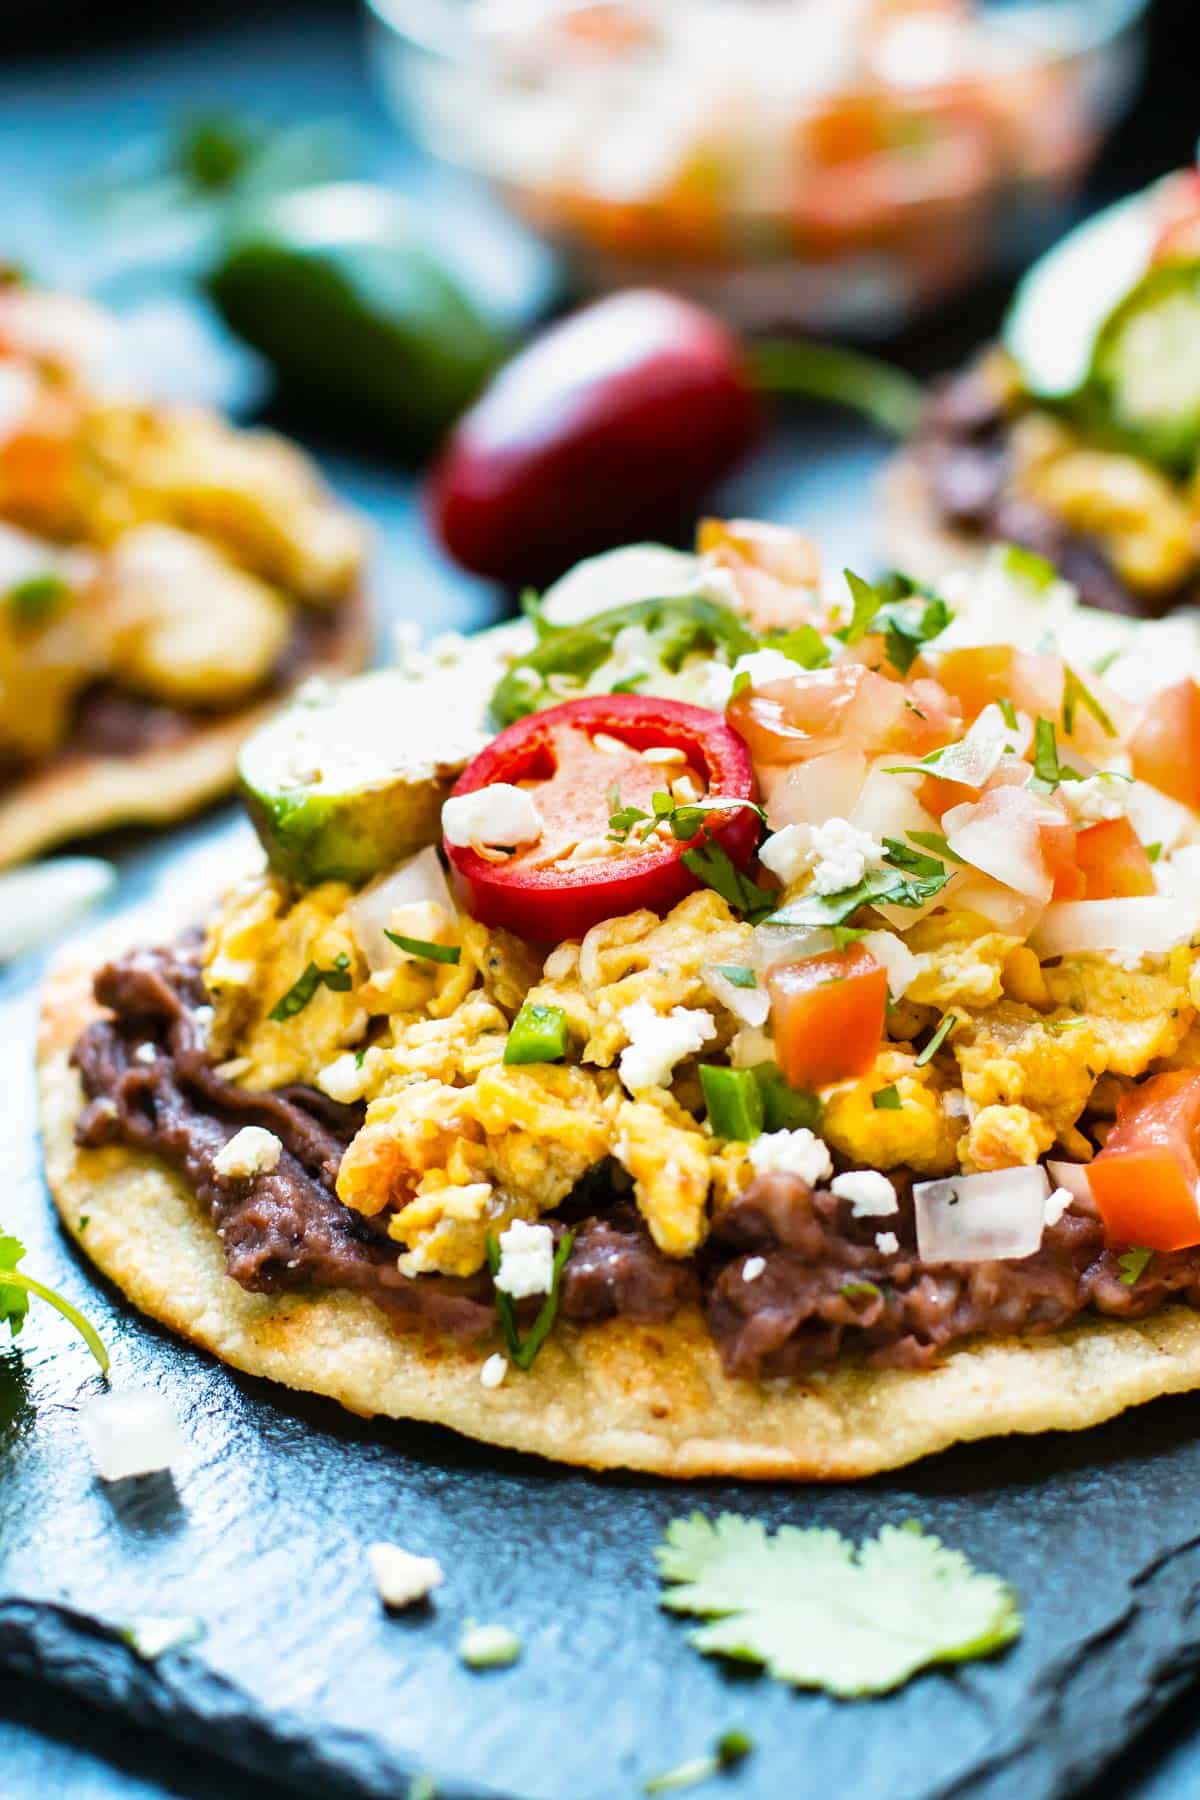 Gluten-free tostada recipe made with eggs and pico de gallo for a healthy lunch.